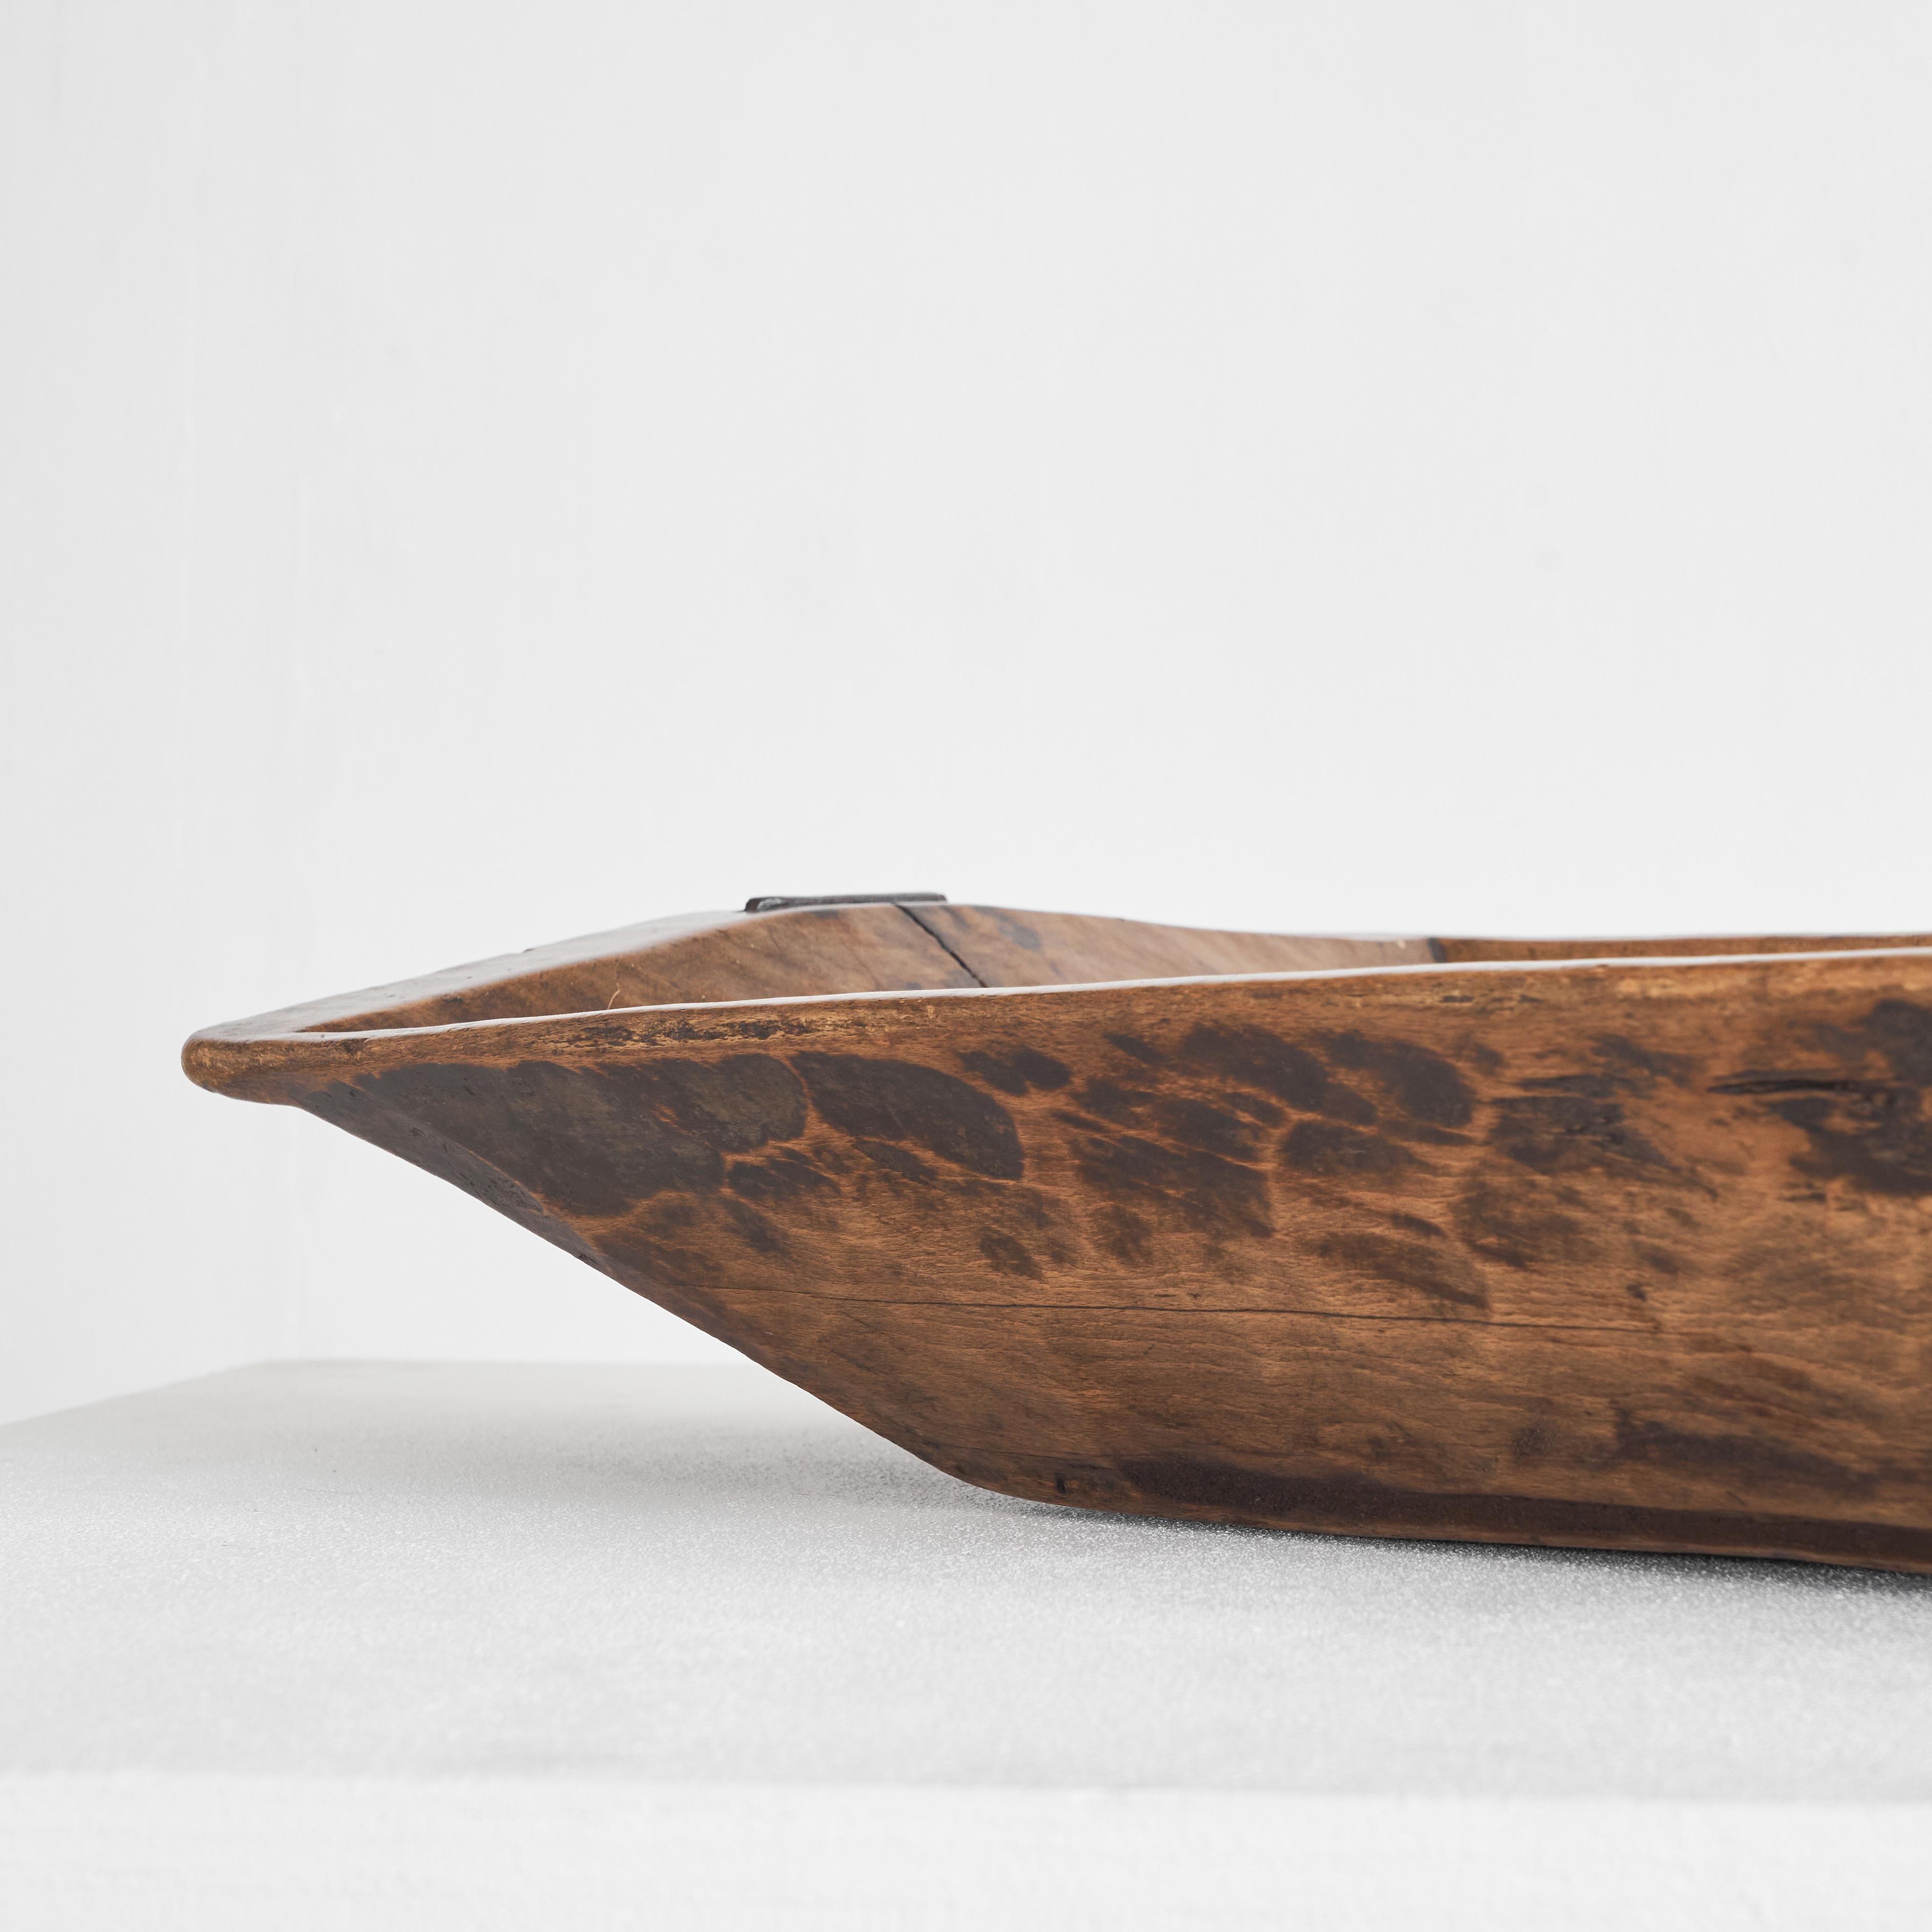 Monumental Antique Hand Carved Wooden Trough or Bowl Wabi Sabi, 19th Century For Sale 4